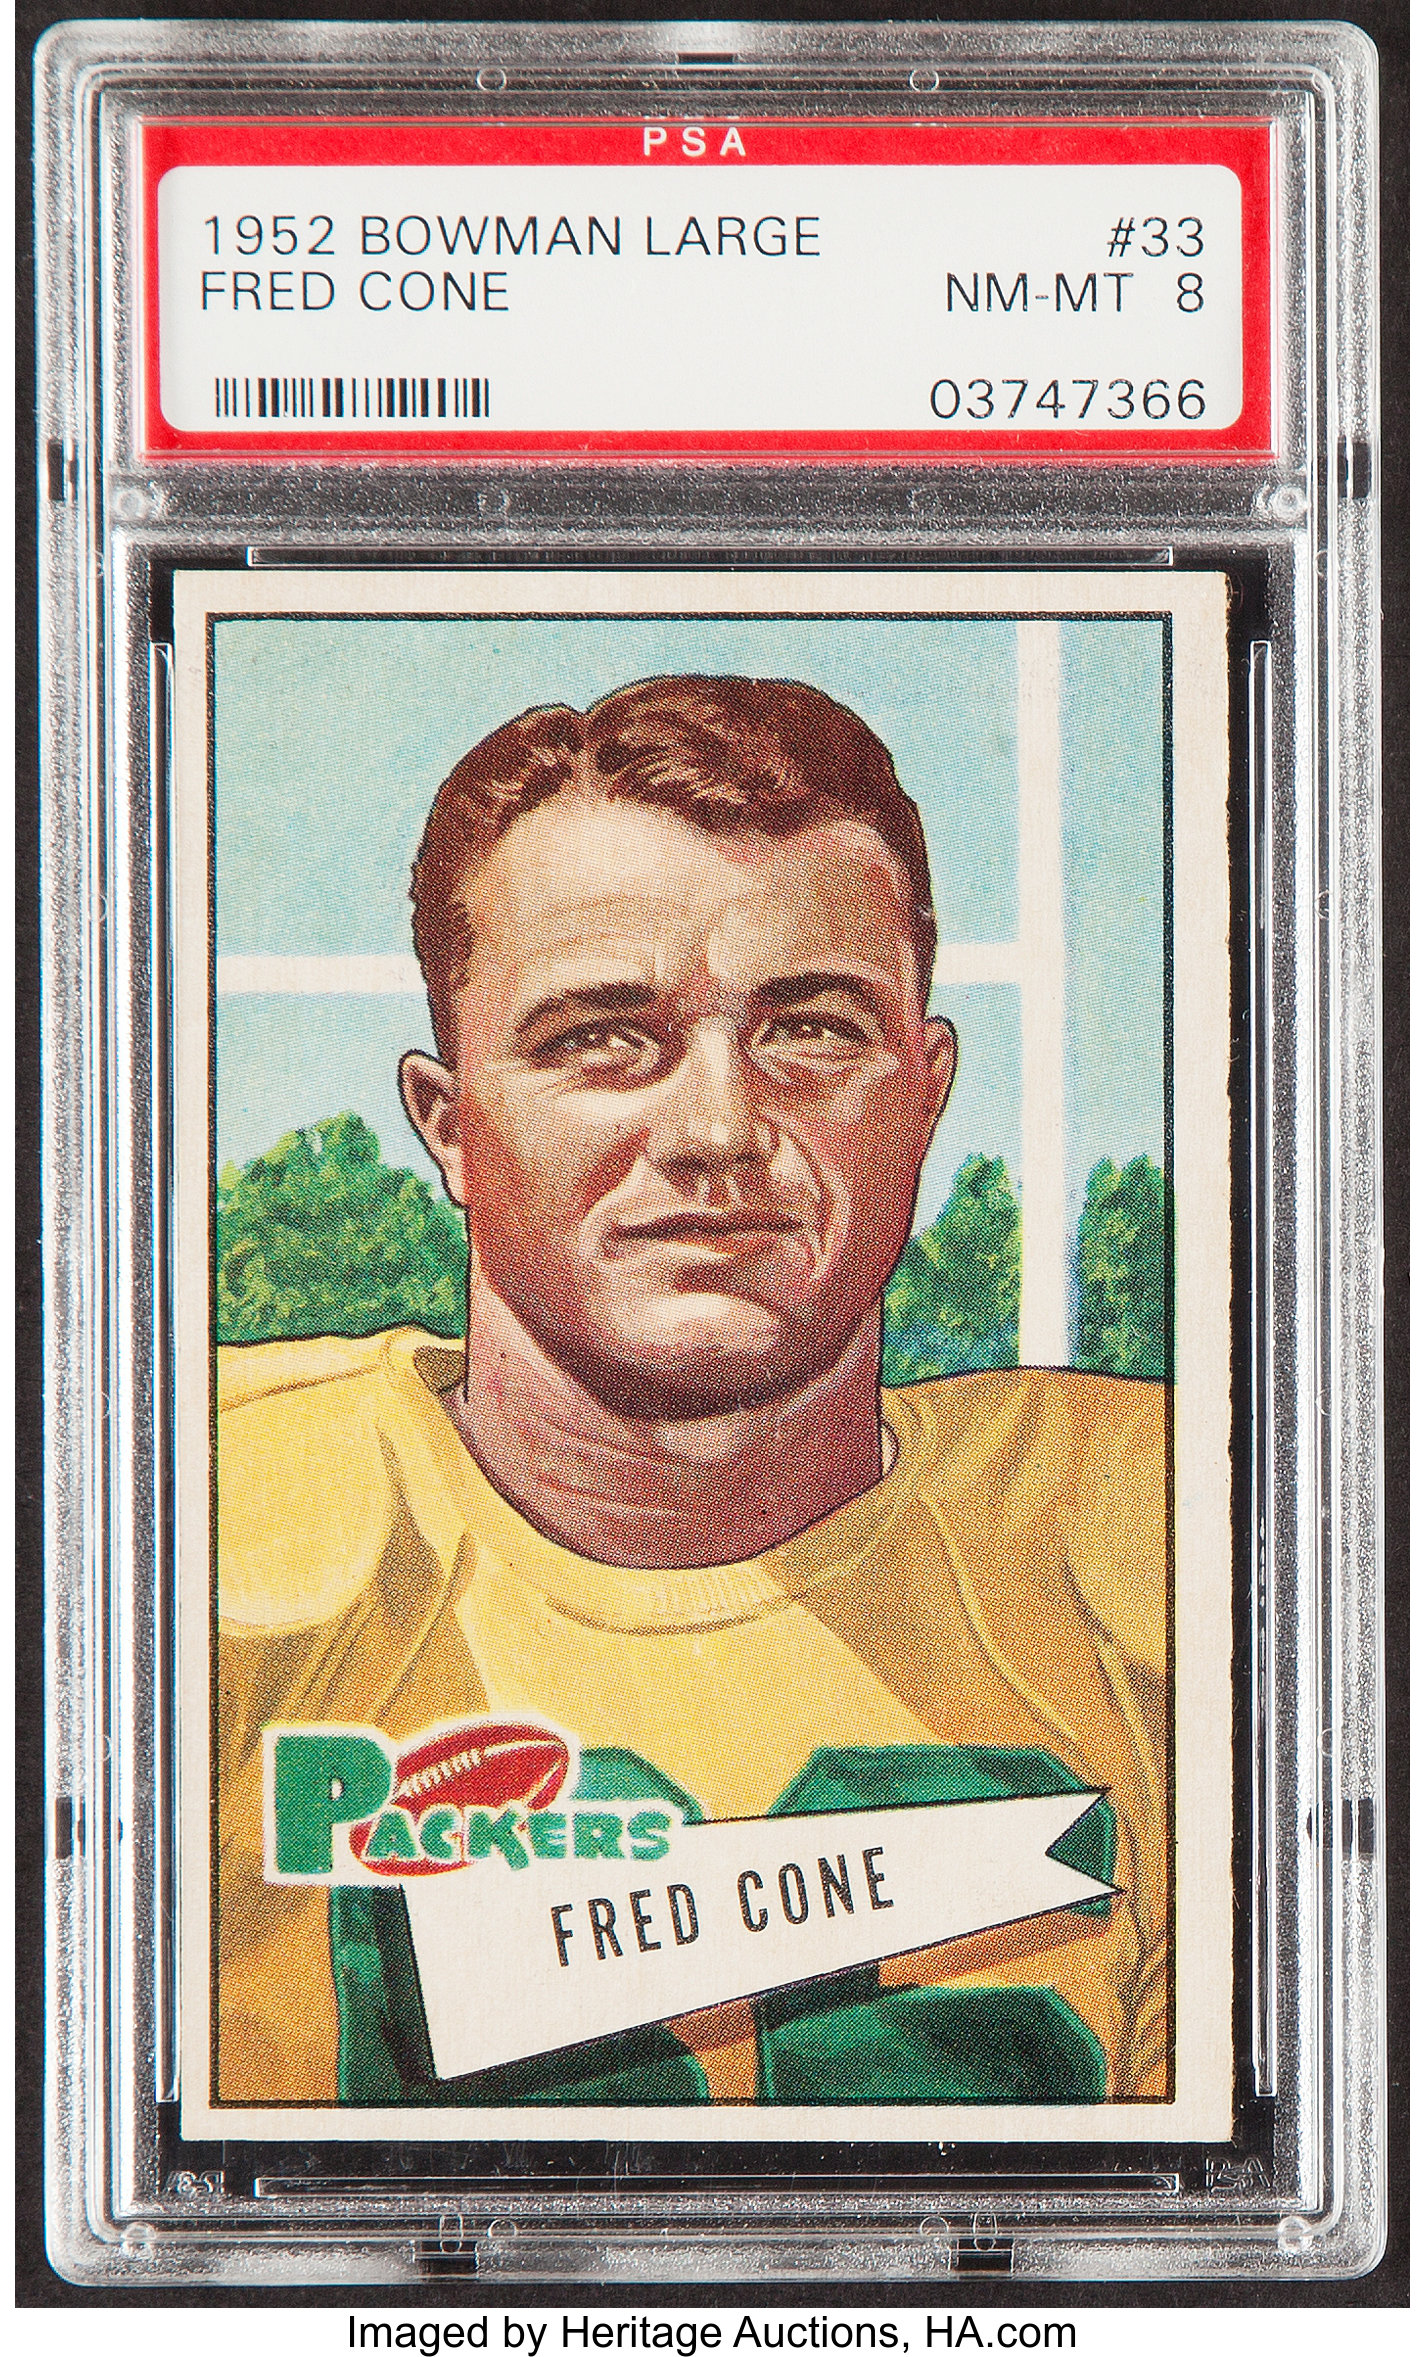 1952 Bowman Large Fred Cone #33 PSA NM-MT 8. Football Cards, Lot #44150